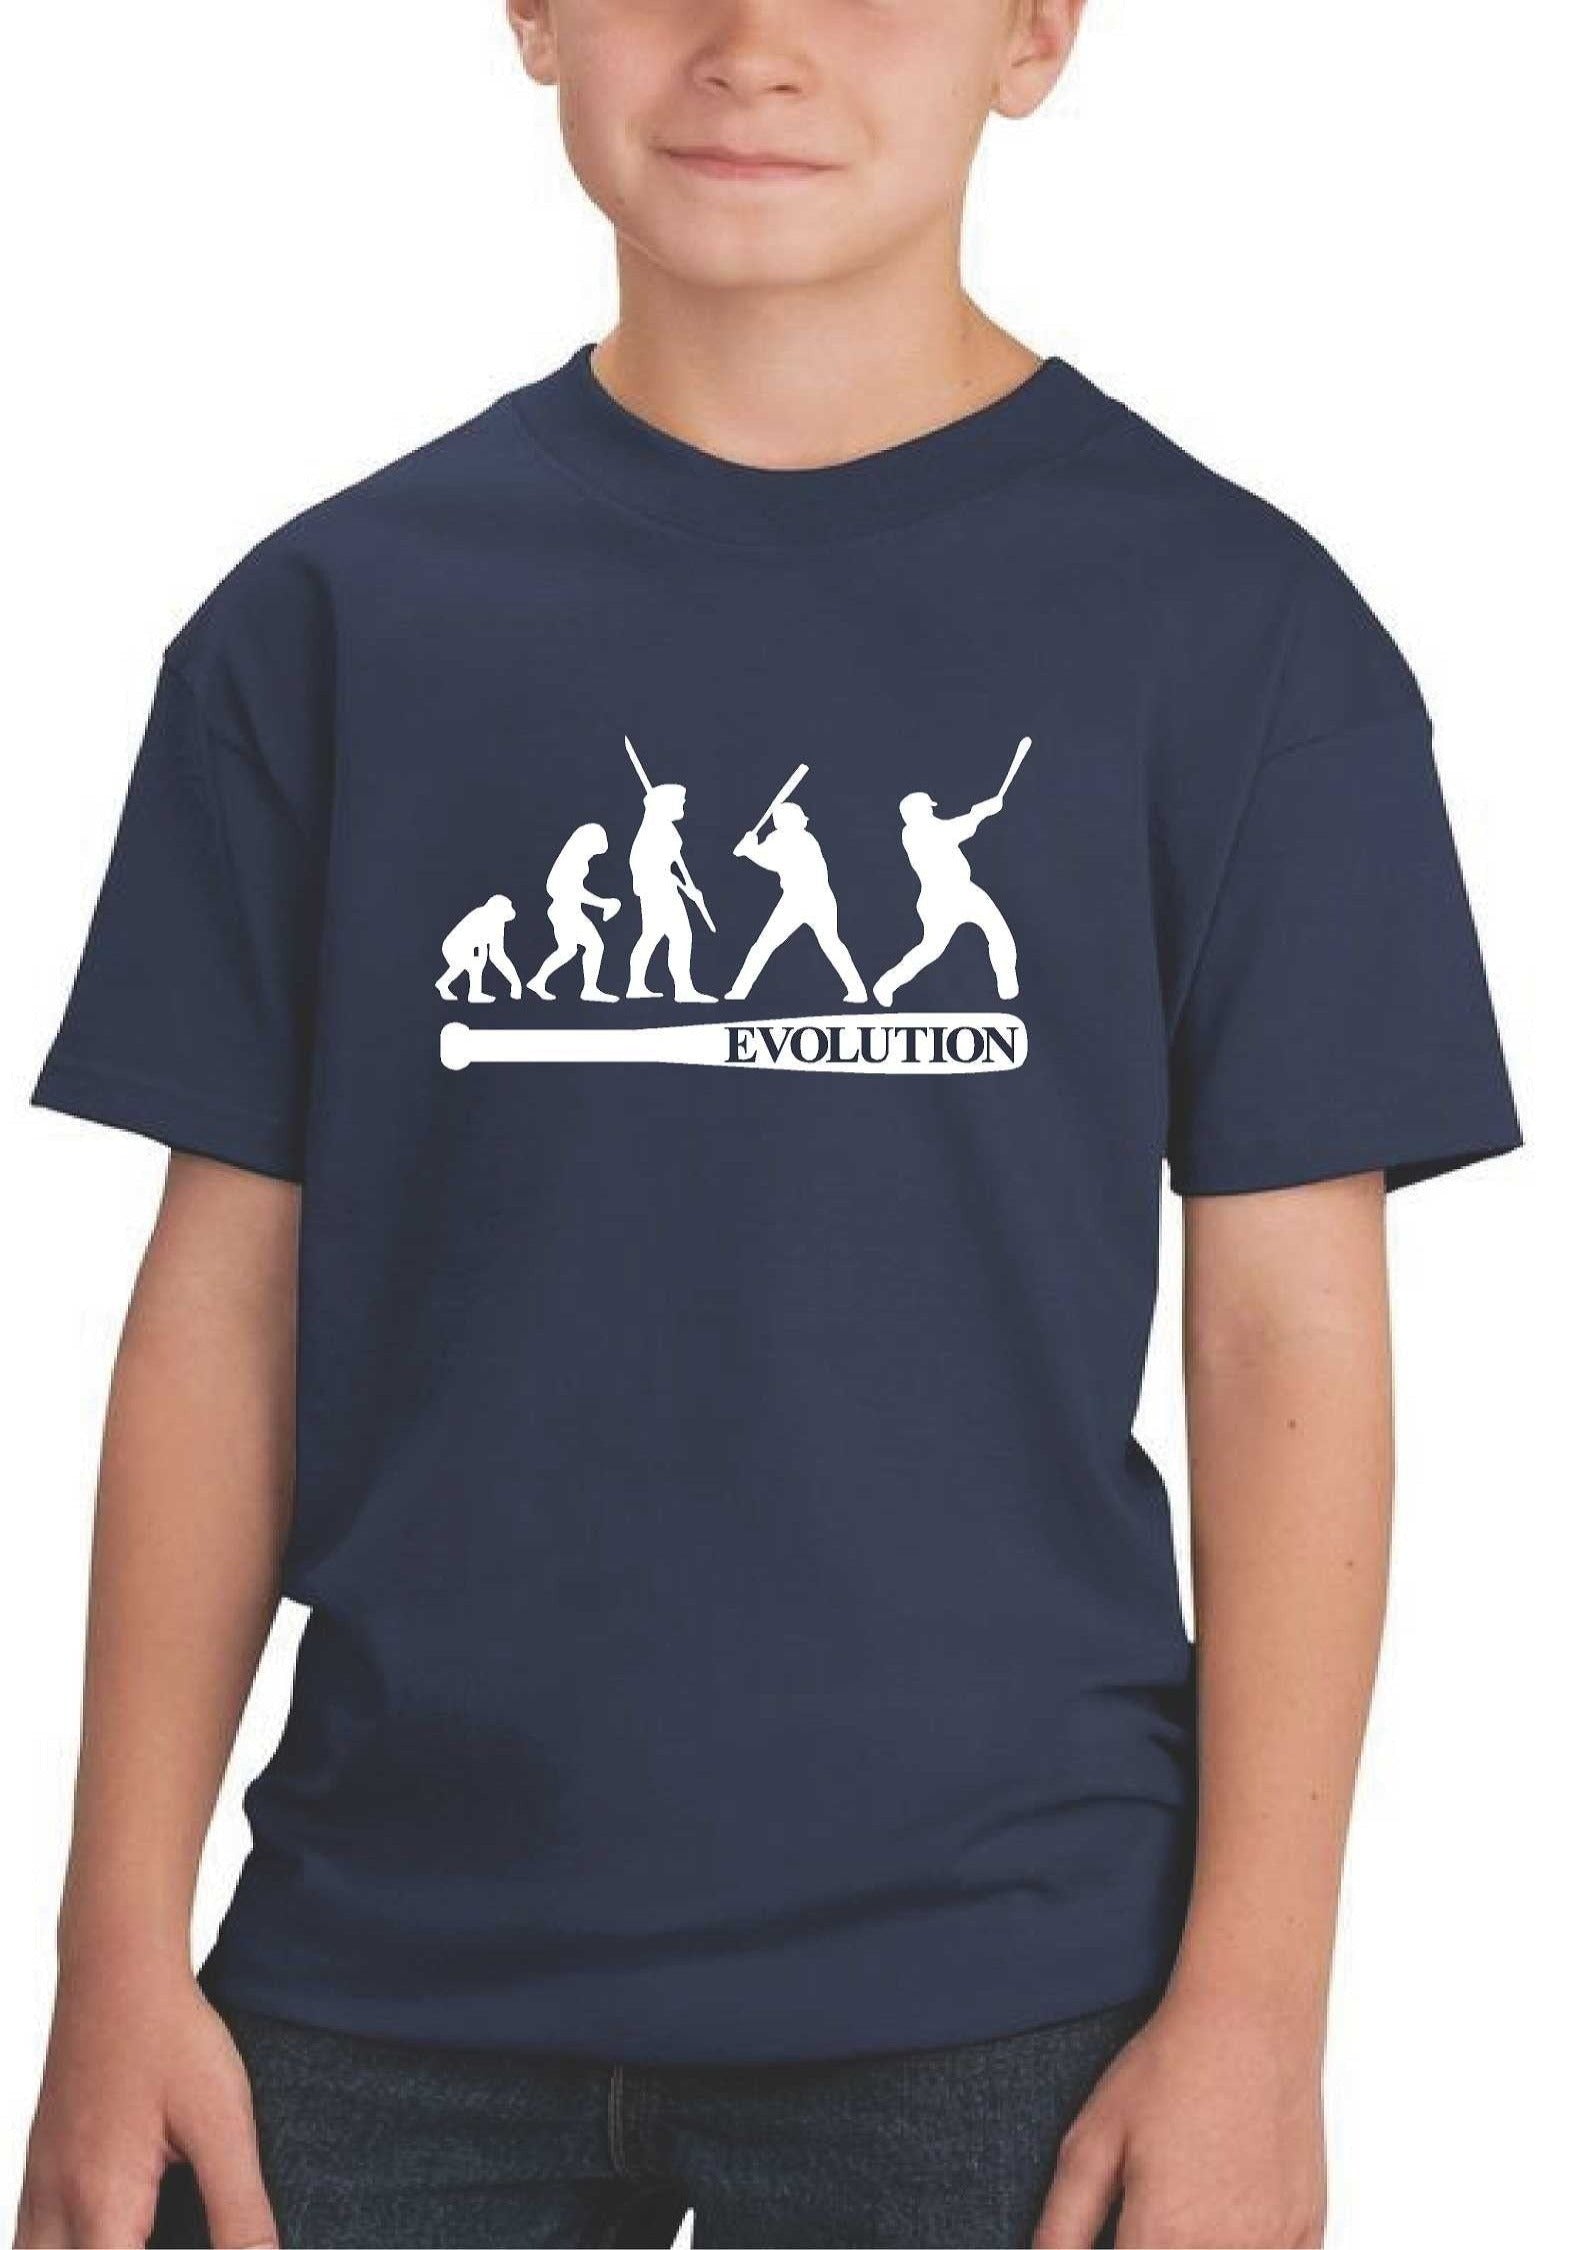 Boys Baseball Evolution Sports Shirts for Youth Sizes Red / XL